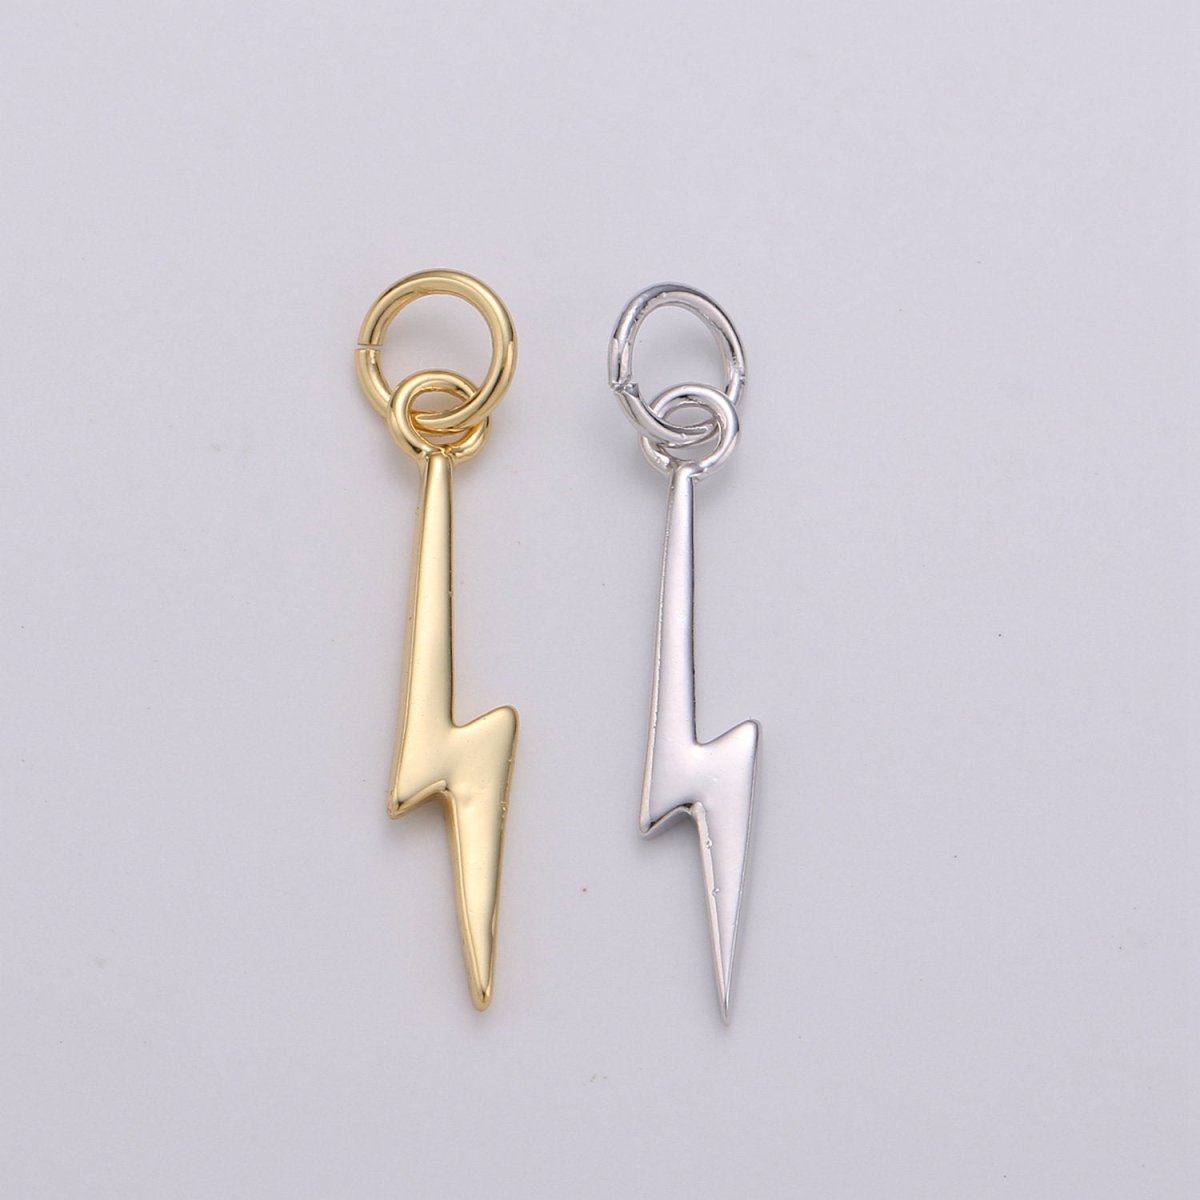 Gold Filled Lightning Bolt Charms, Silver Bolt, Wizard Charm, Thunder Pendant 22 x 5mm Dainty Charm for Necklace Bracelet Earring Supply D-355 D-356 - DLUXCA